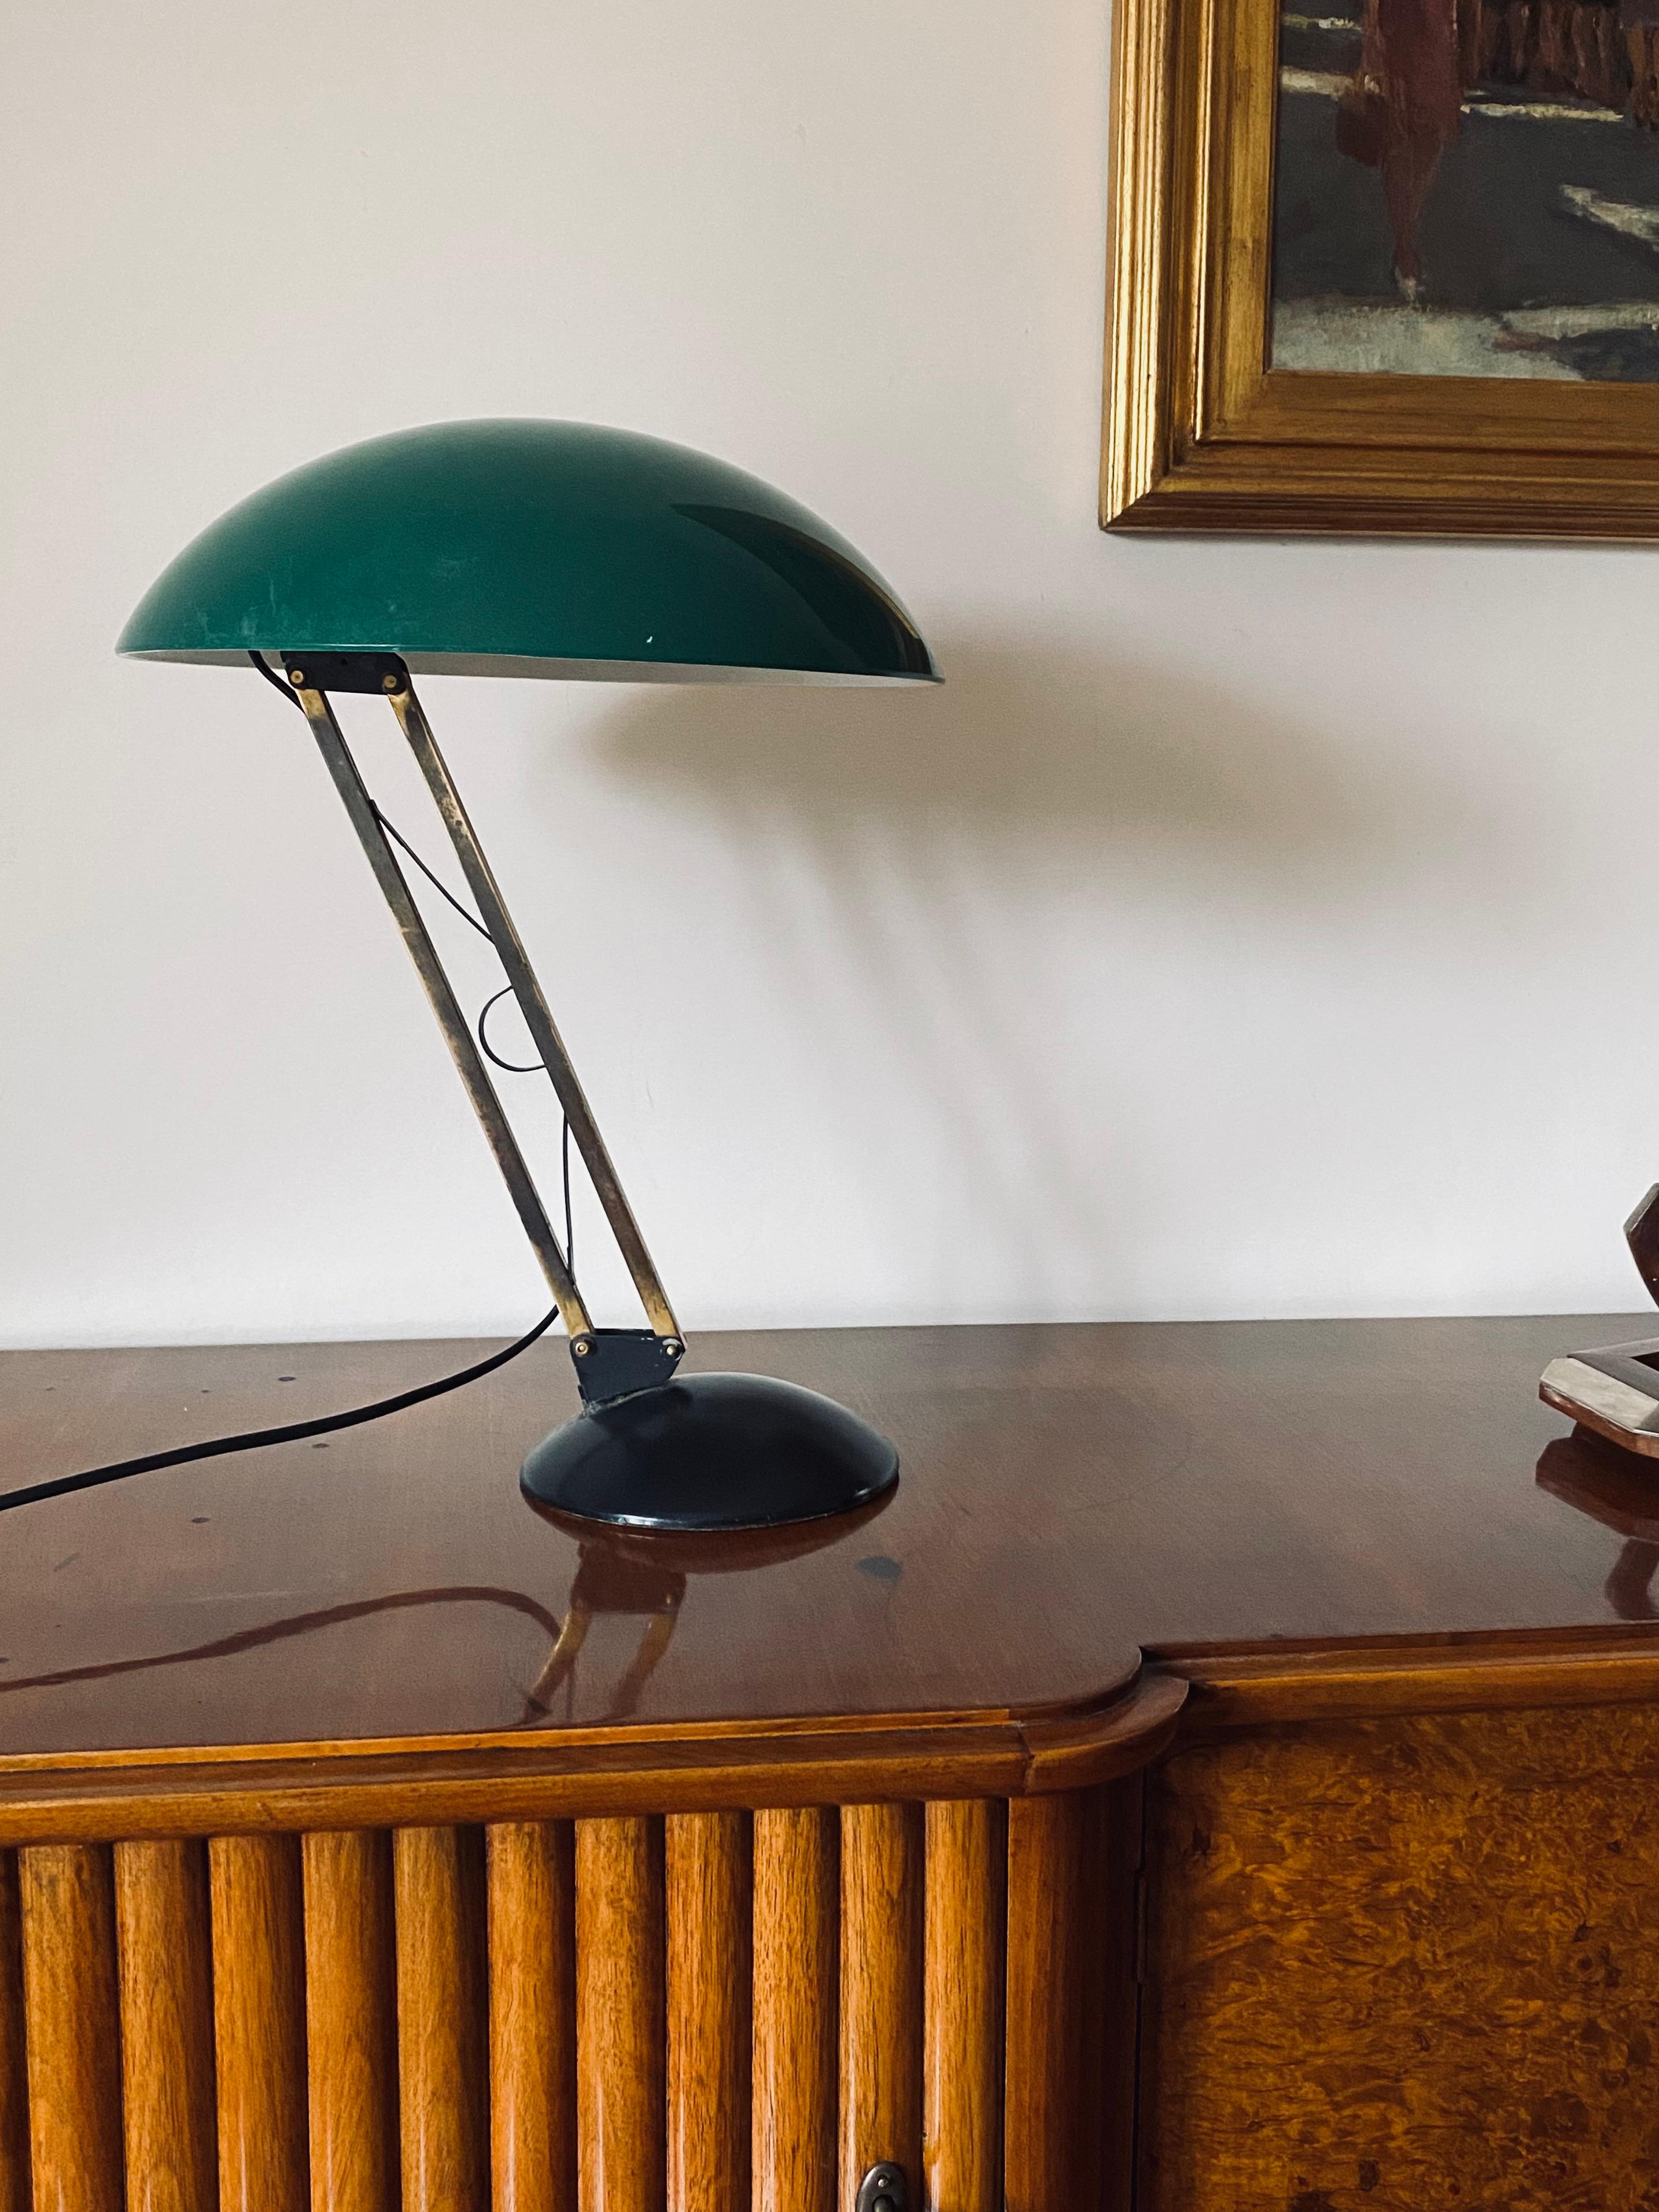 Mid-century table lamp 

Italy, 1960s

Green perspex domed shade. Brass rod. Black aluminum base

articulating arm with adjustable joints.

H 47 cm 

Diam. 37cm

Conditions: good consistent with age and use, signs of wear on the rod. In working